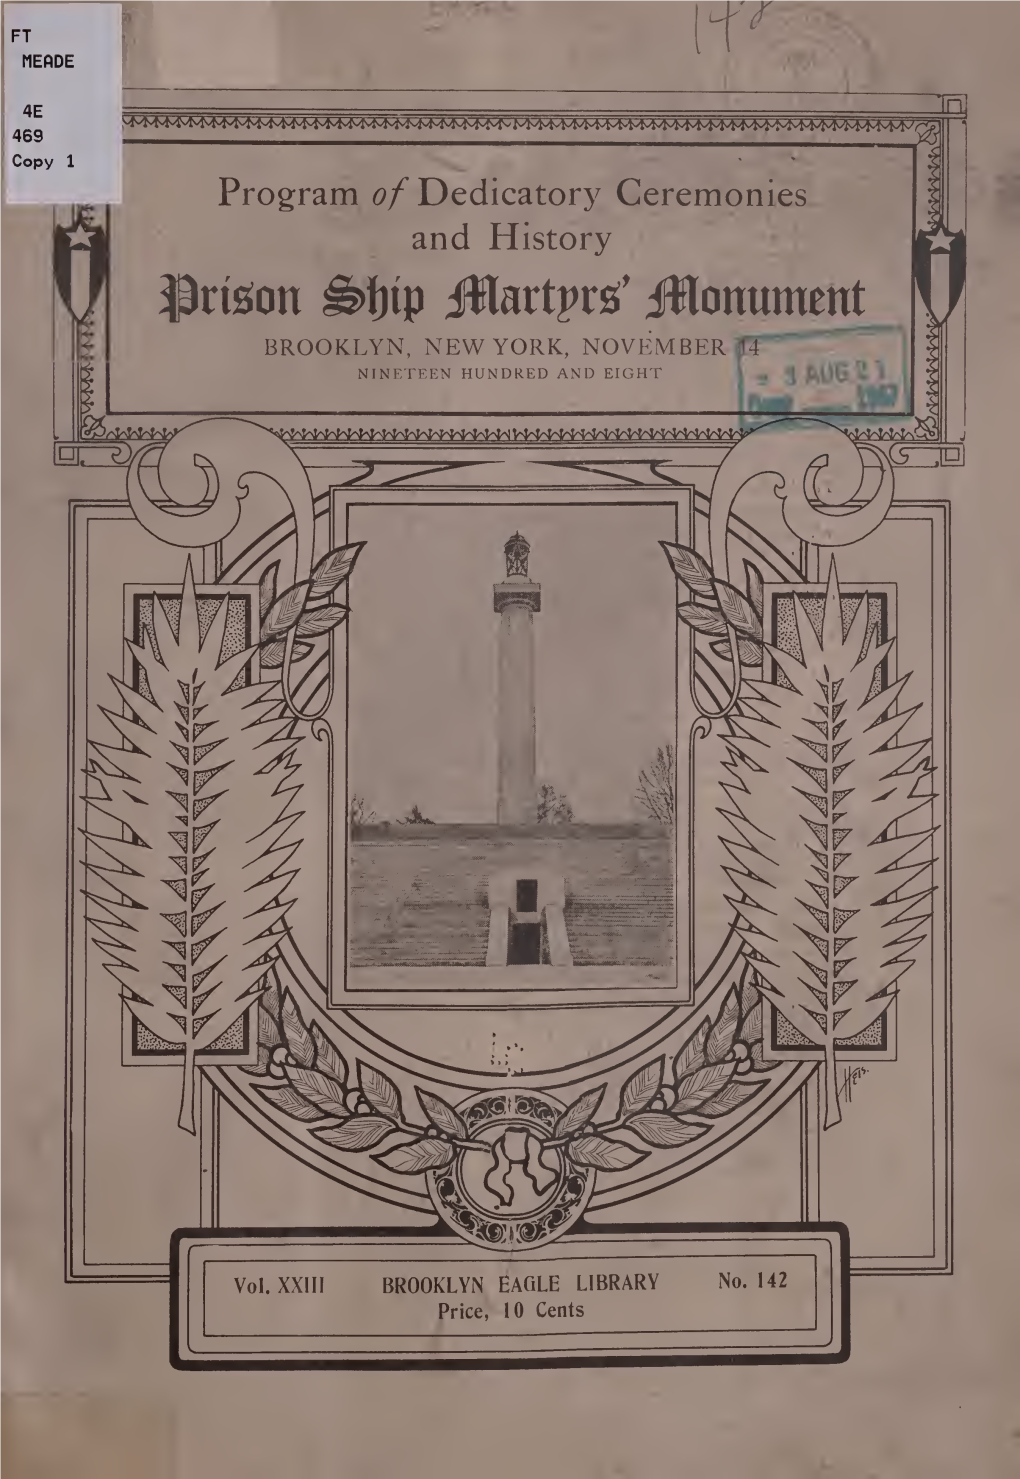 Program of the Dedicatory Ceremonies of the Prison Ship Martyrs' Monument